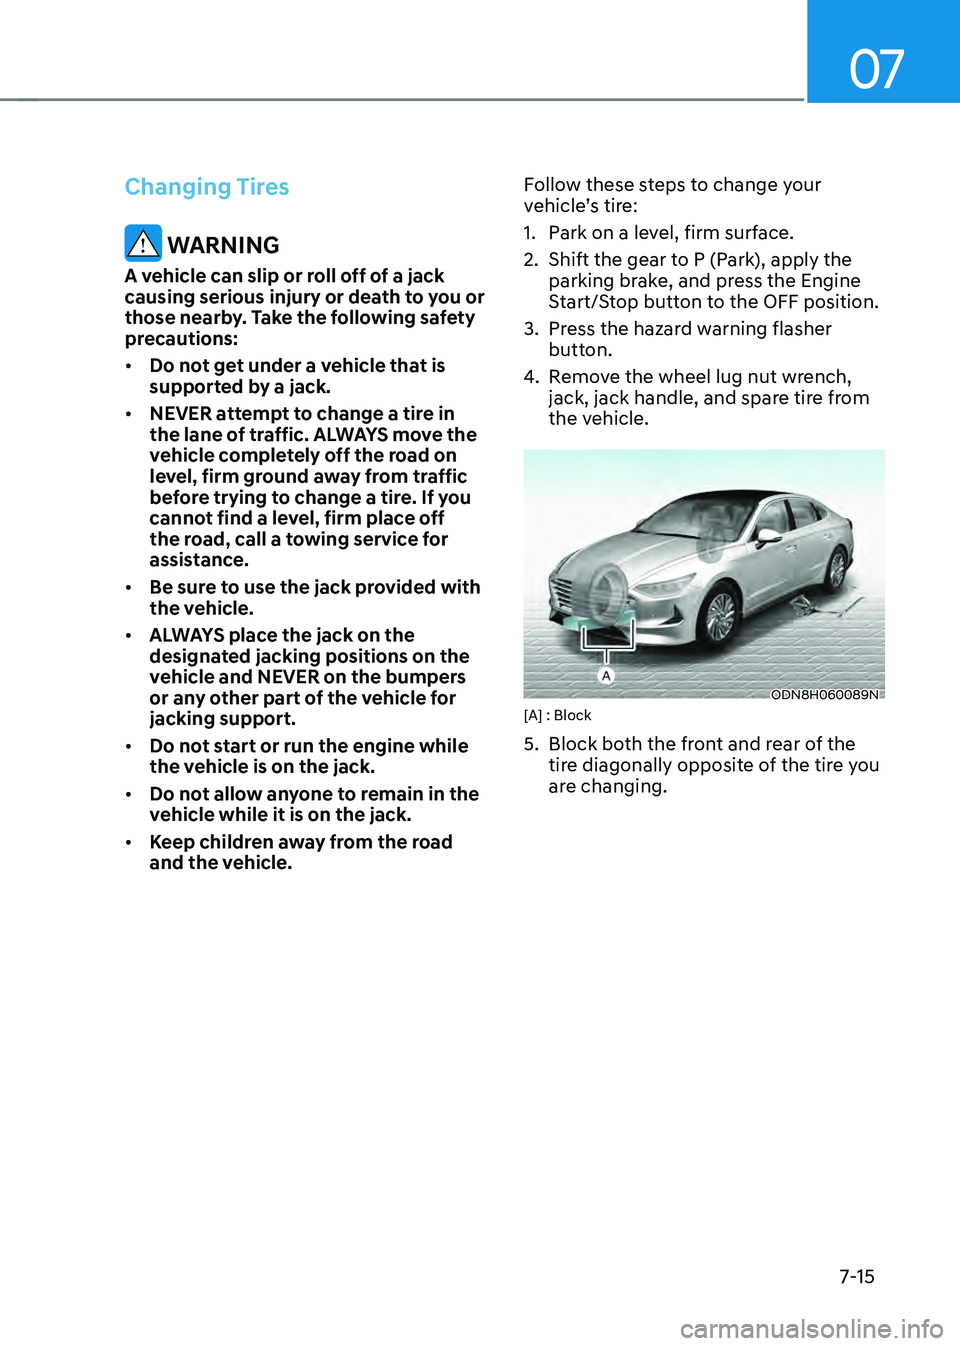 HYUNDAI SONATA HYBRID 2022 Owners Guide 07
7-15
Changing Tires
 WARNING
A vehicle can slip or roll off of a jack 
causing serious injury or death to you or 
those nearby. Take the following safety 
precautions:
•	Do not get under a vehicl